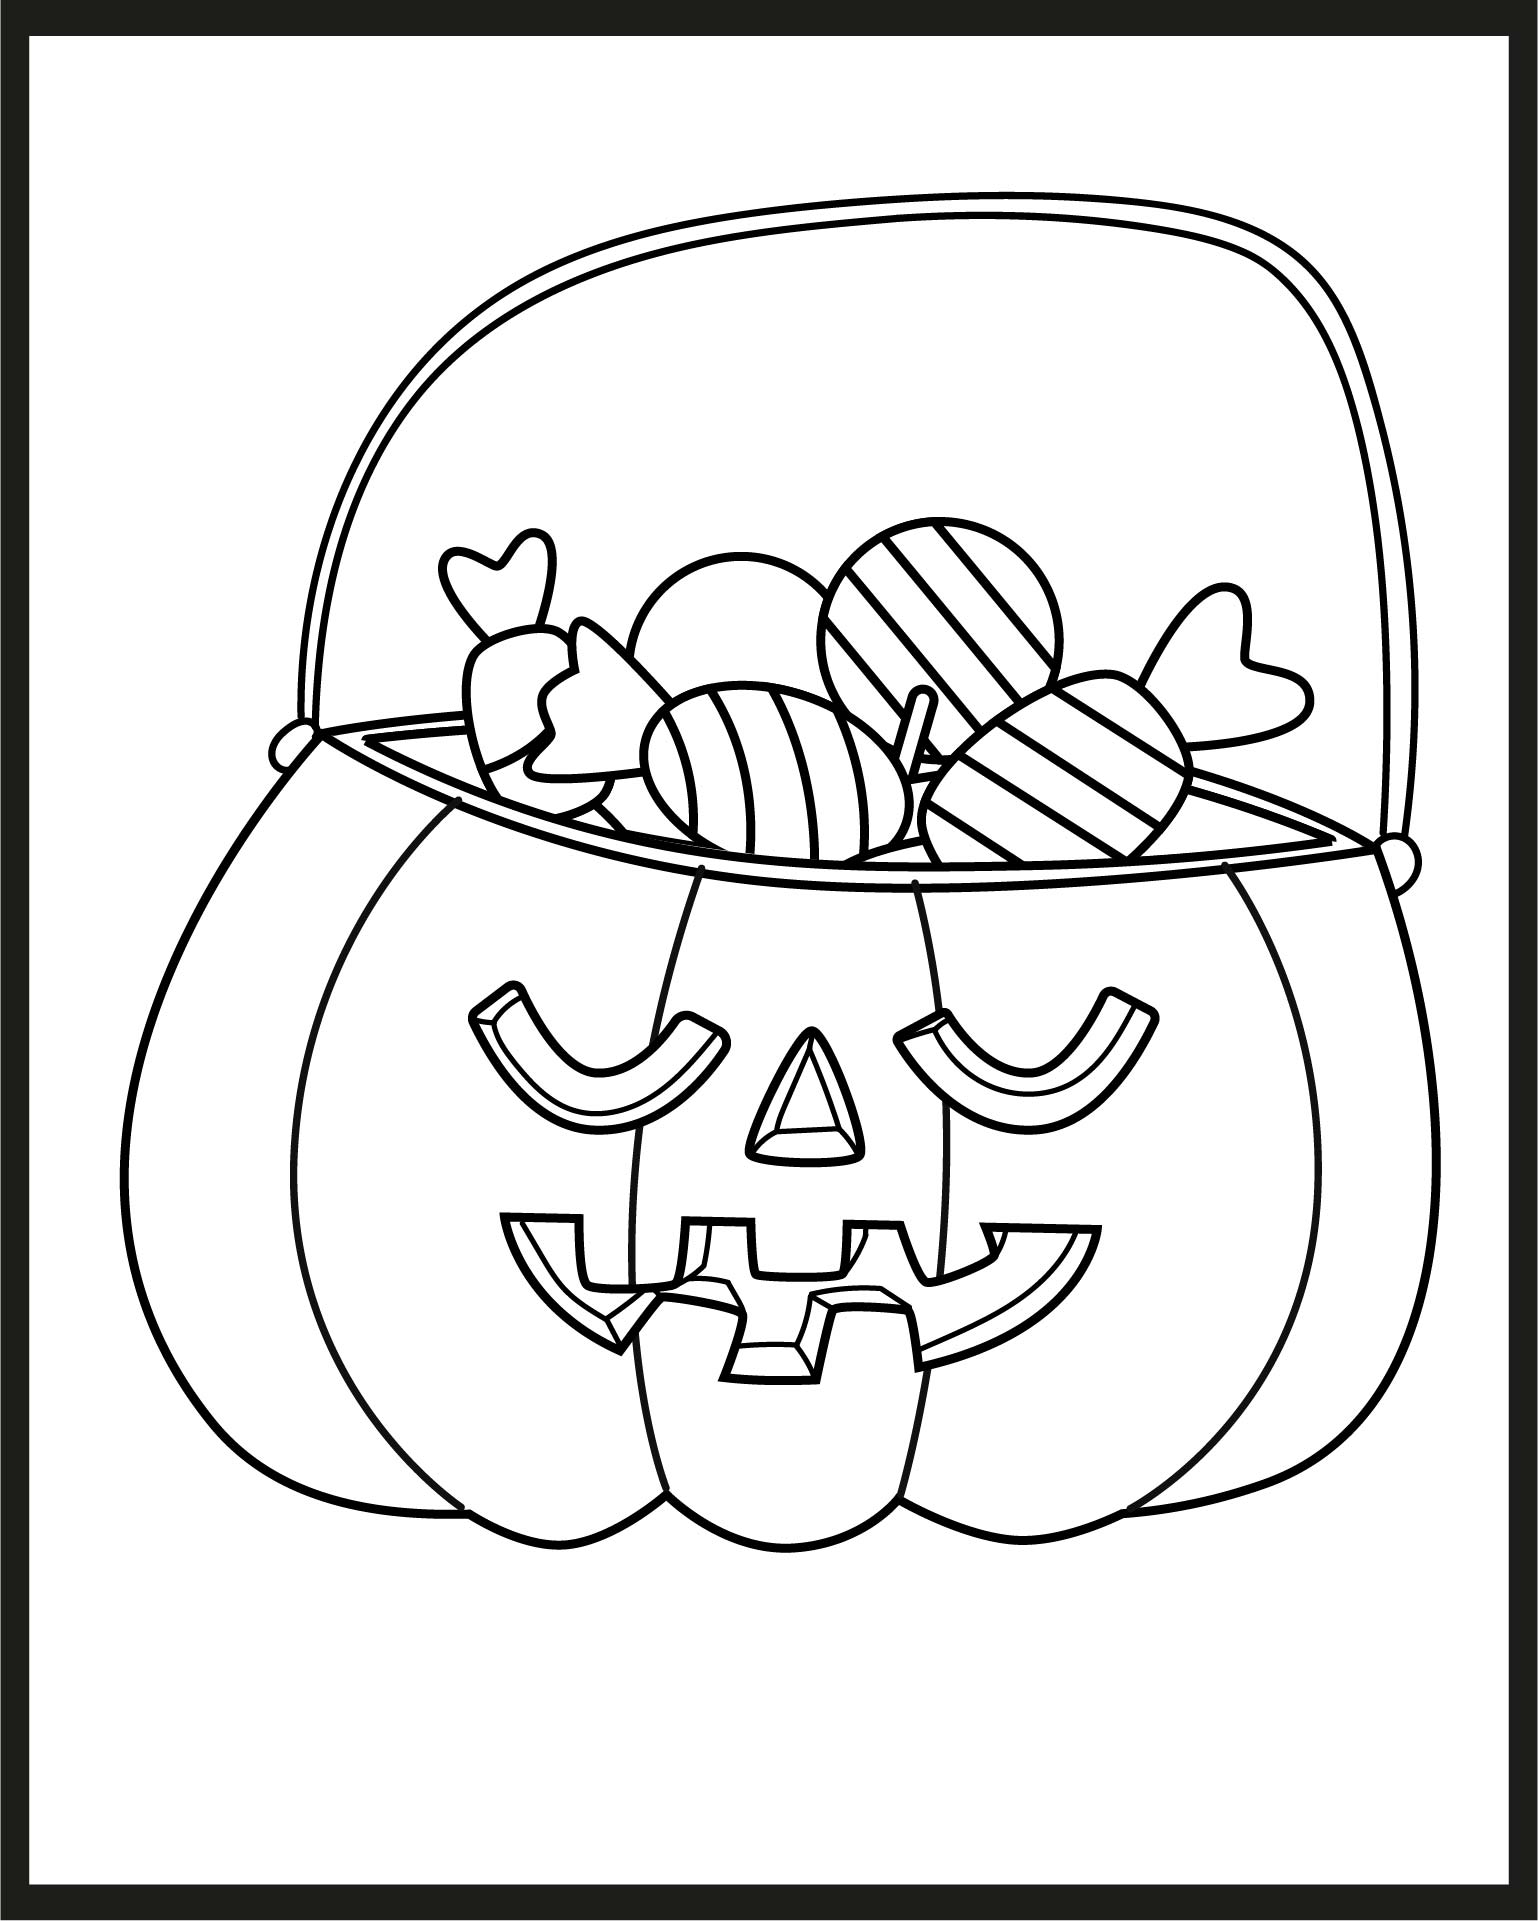 Candy In A Pumpkin Coloring Page Printable